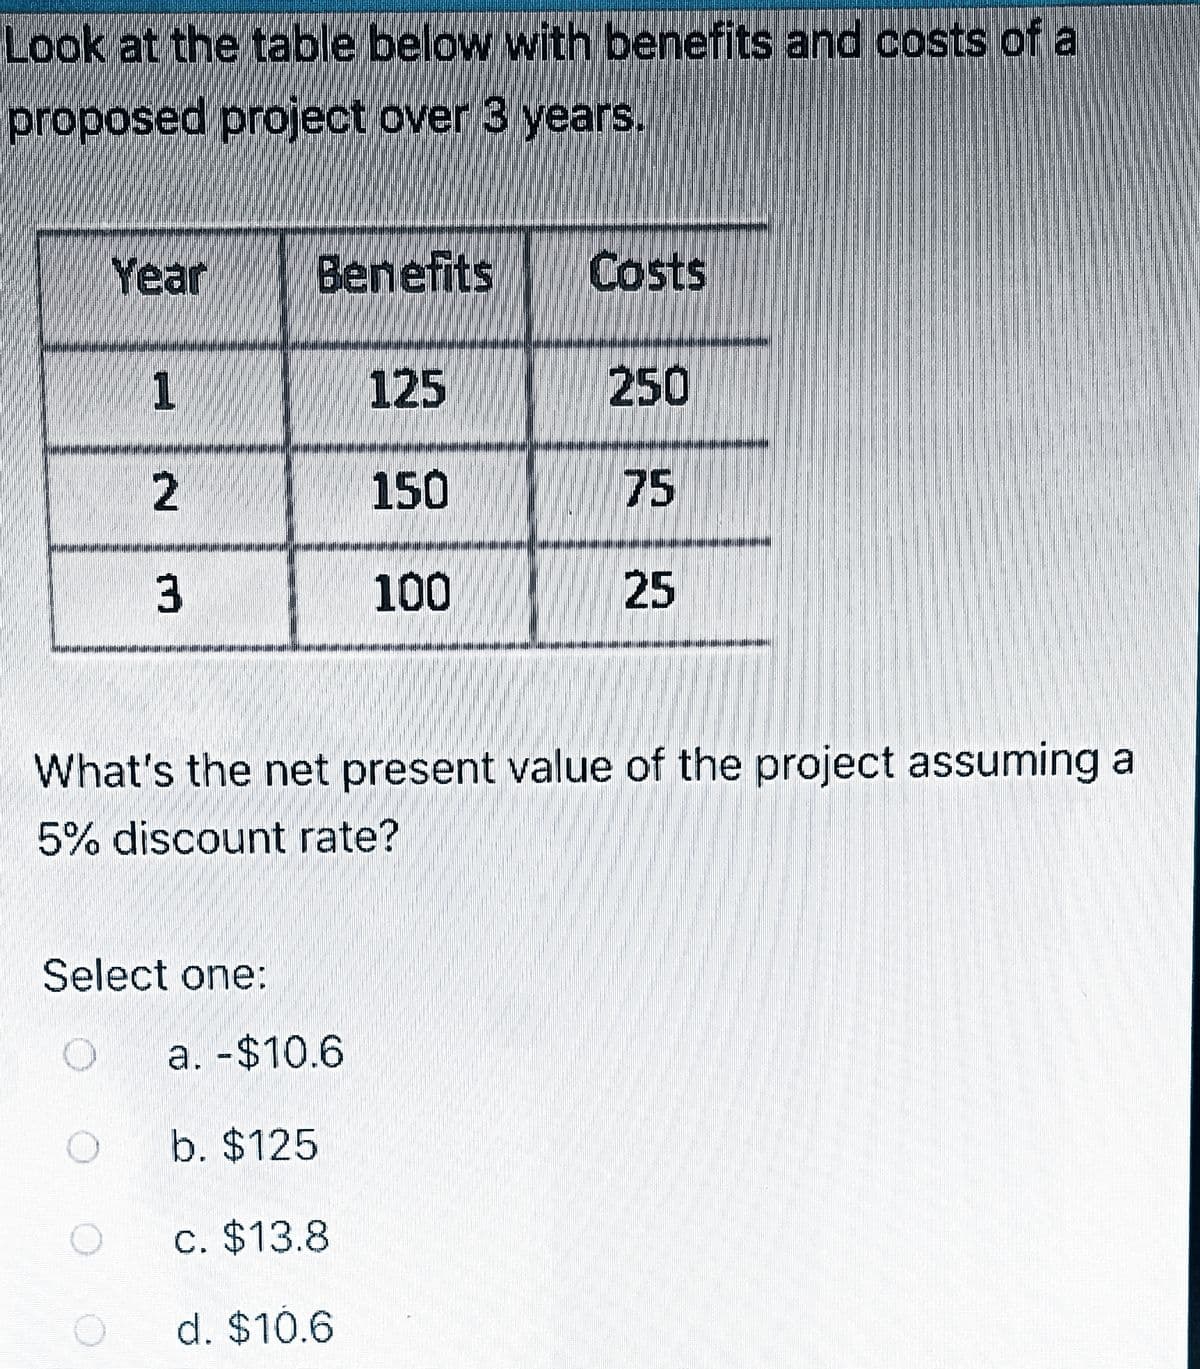 Look at the table below with benefits and costs of a
proposed project over 3 years.
Year
Benefits
Costs
125
250
2
150
75
3
100
25
What's the net present value of the project assuming a
5% discount rate?
Select one:
a. -$10.6
b. $125
c. $13.8
d. $10.6
